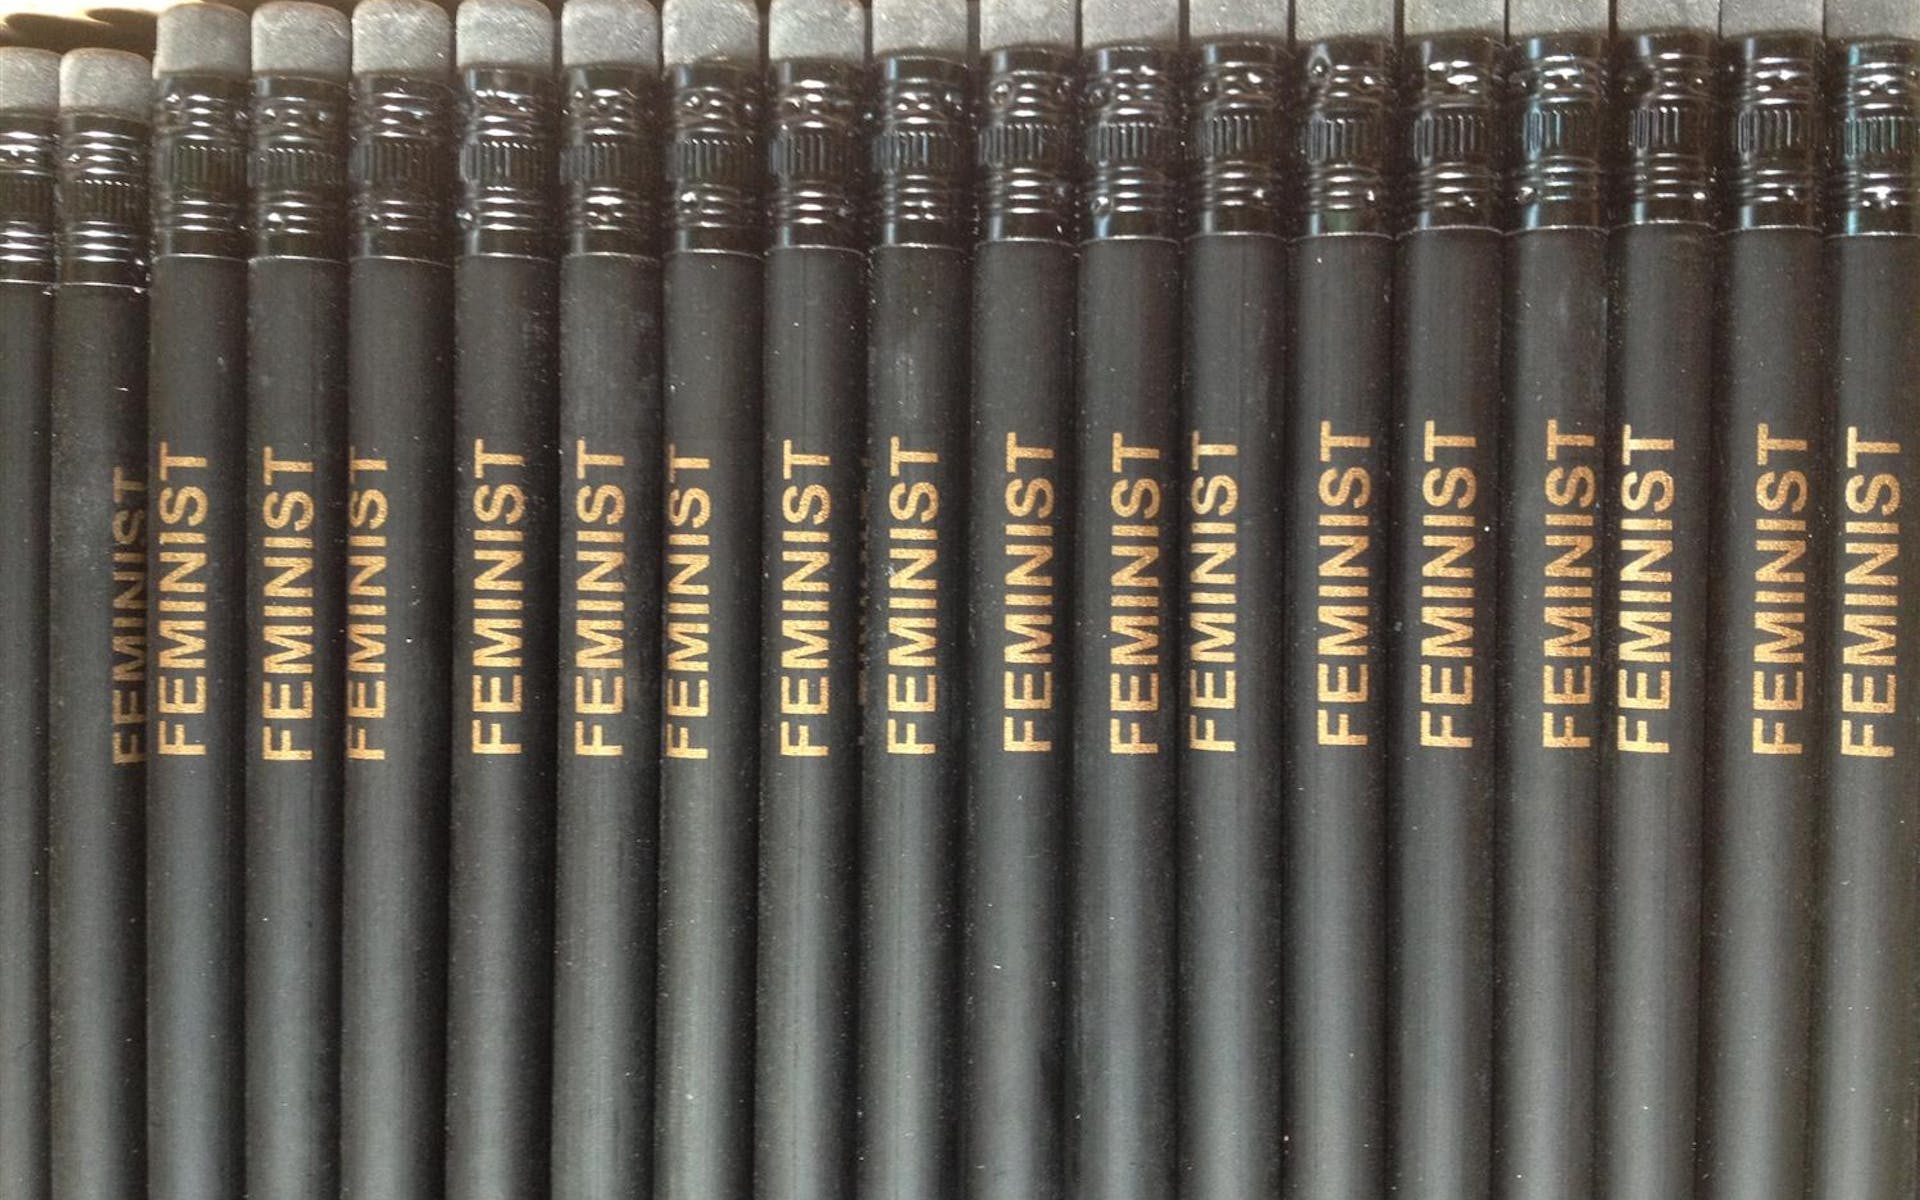 A series of black penicls with the word "feminist" printed on them are lined up on a tabletop.